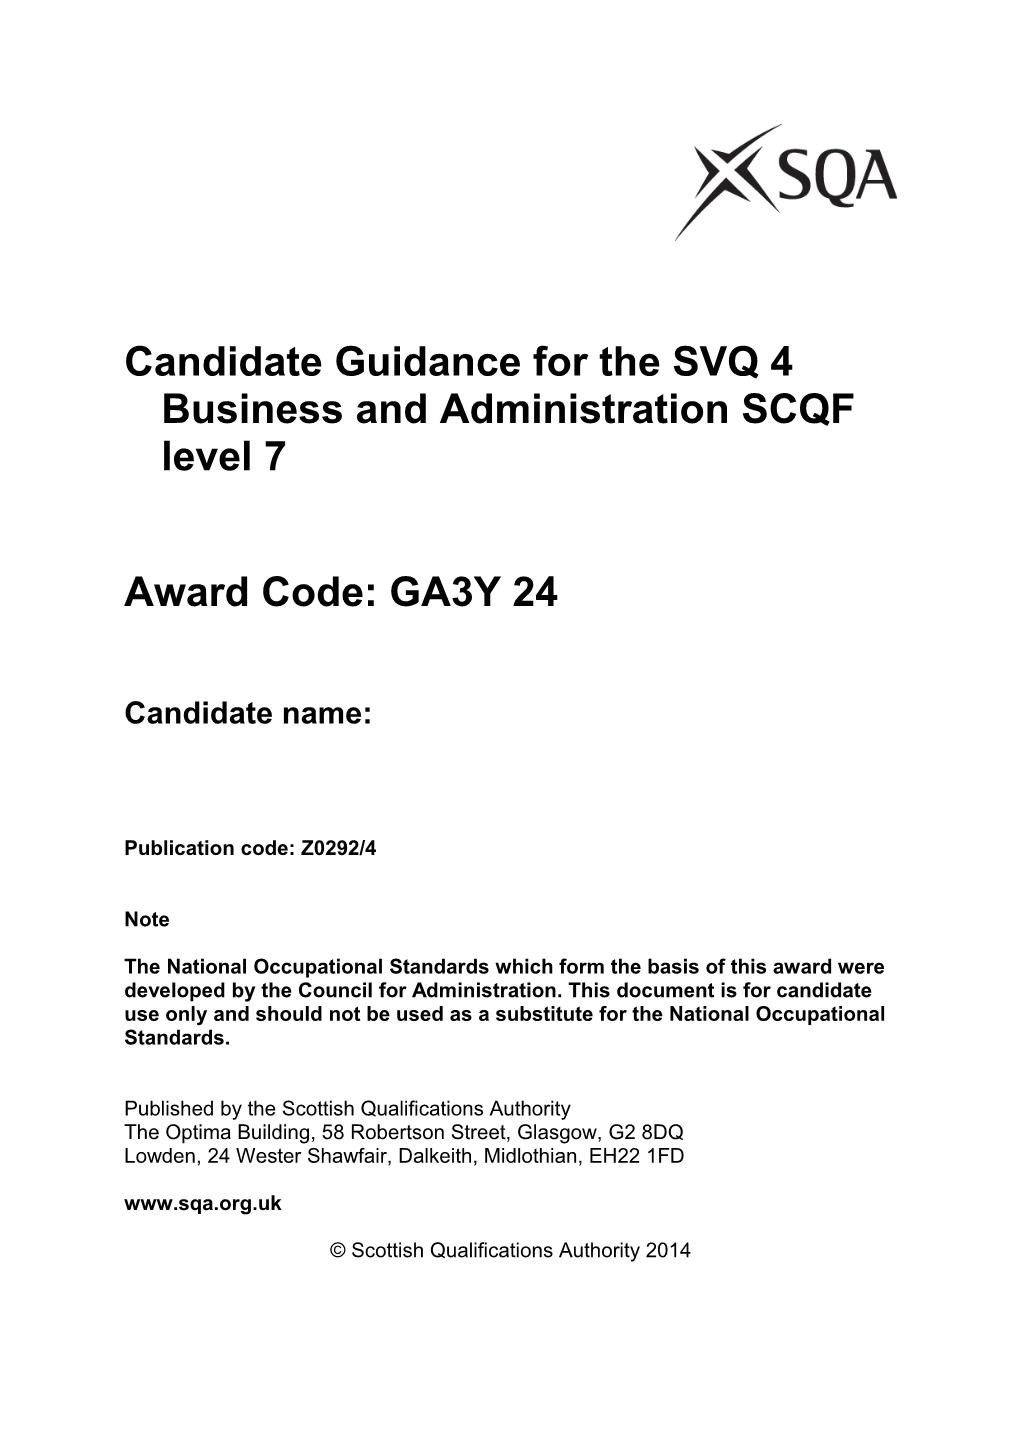 Candidate Guidance for the SVQ 4 Business and Administration SCQF Level 7